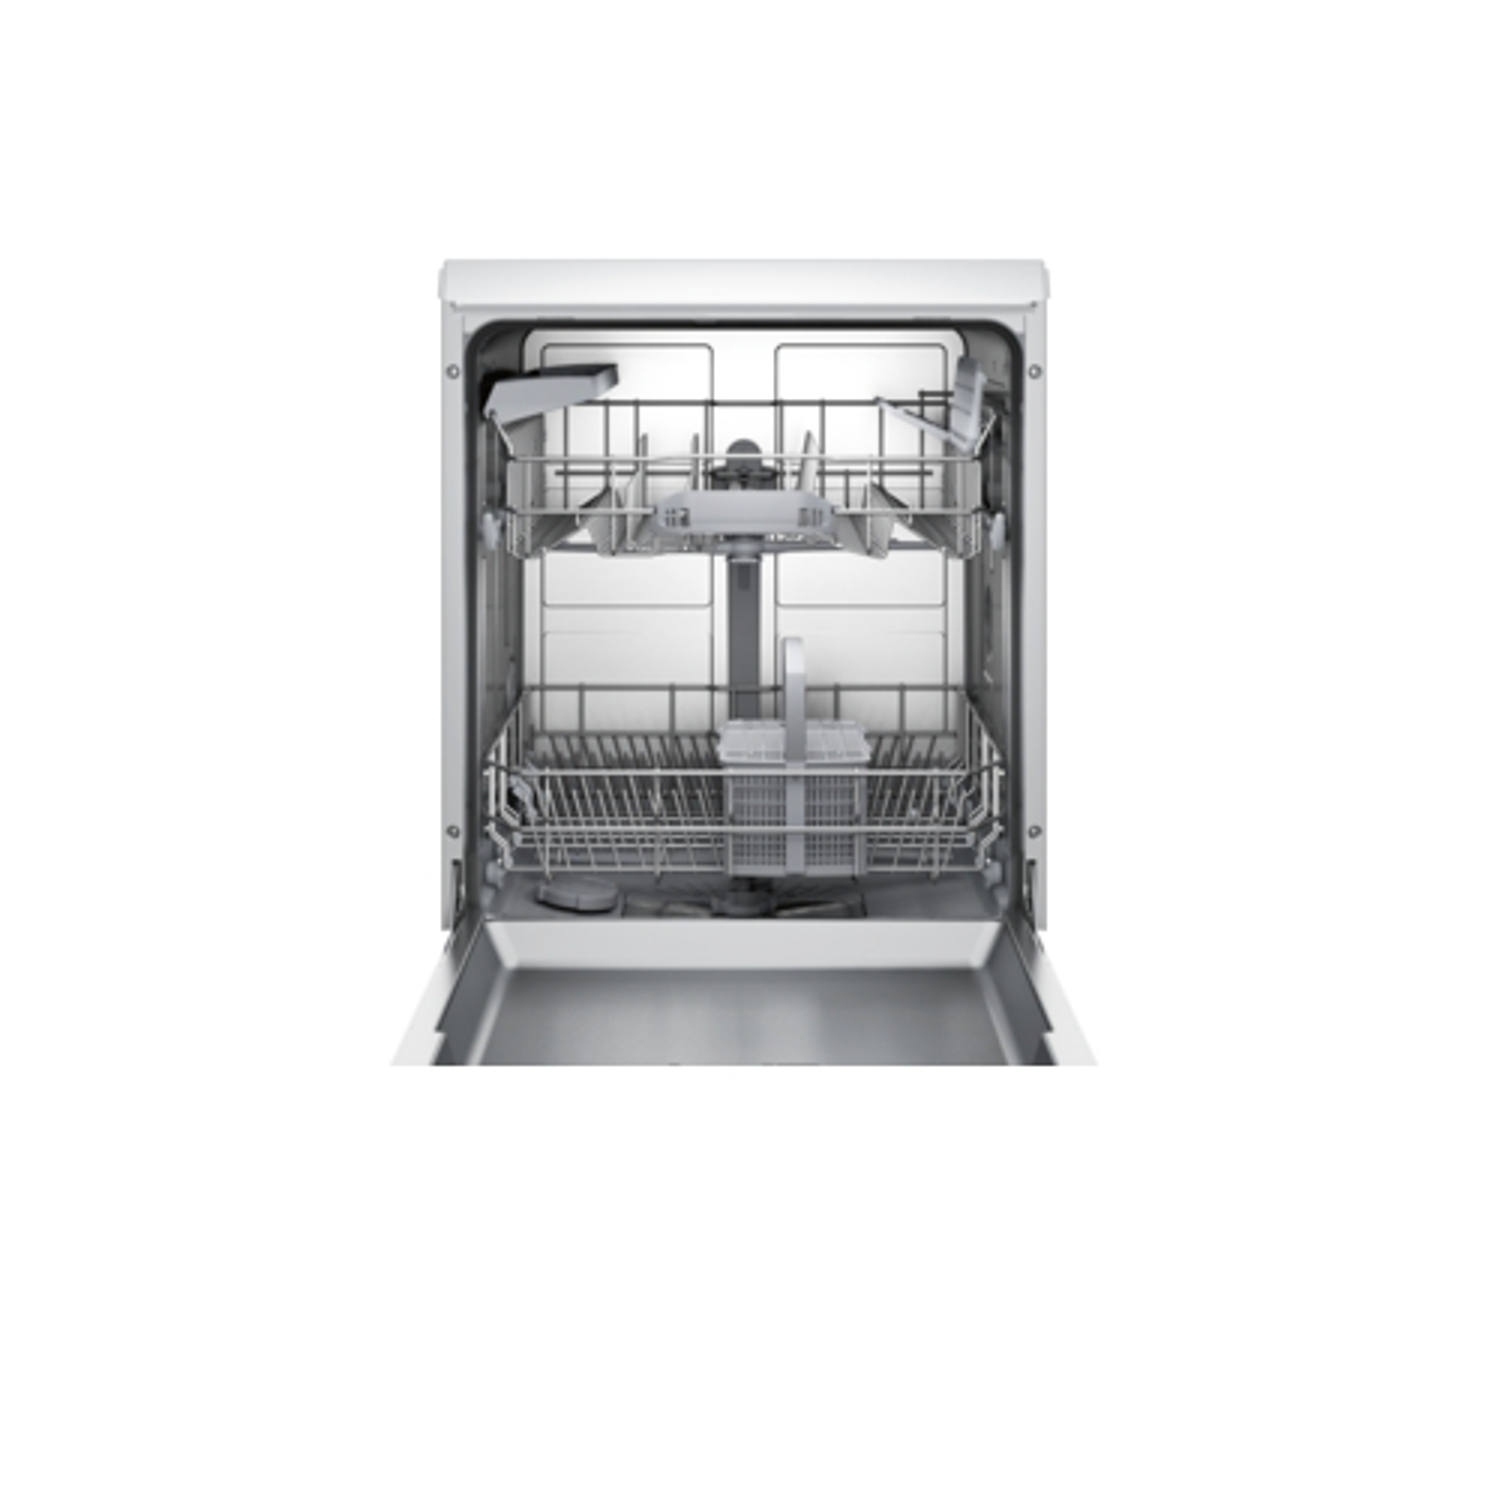 Bosch Full Size Dishwasher - White - A++ Rated - 3